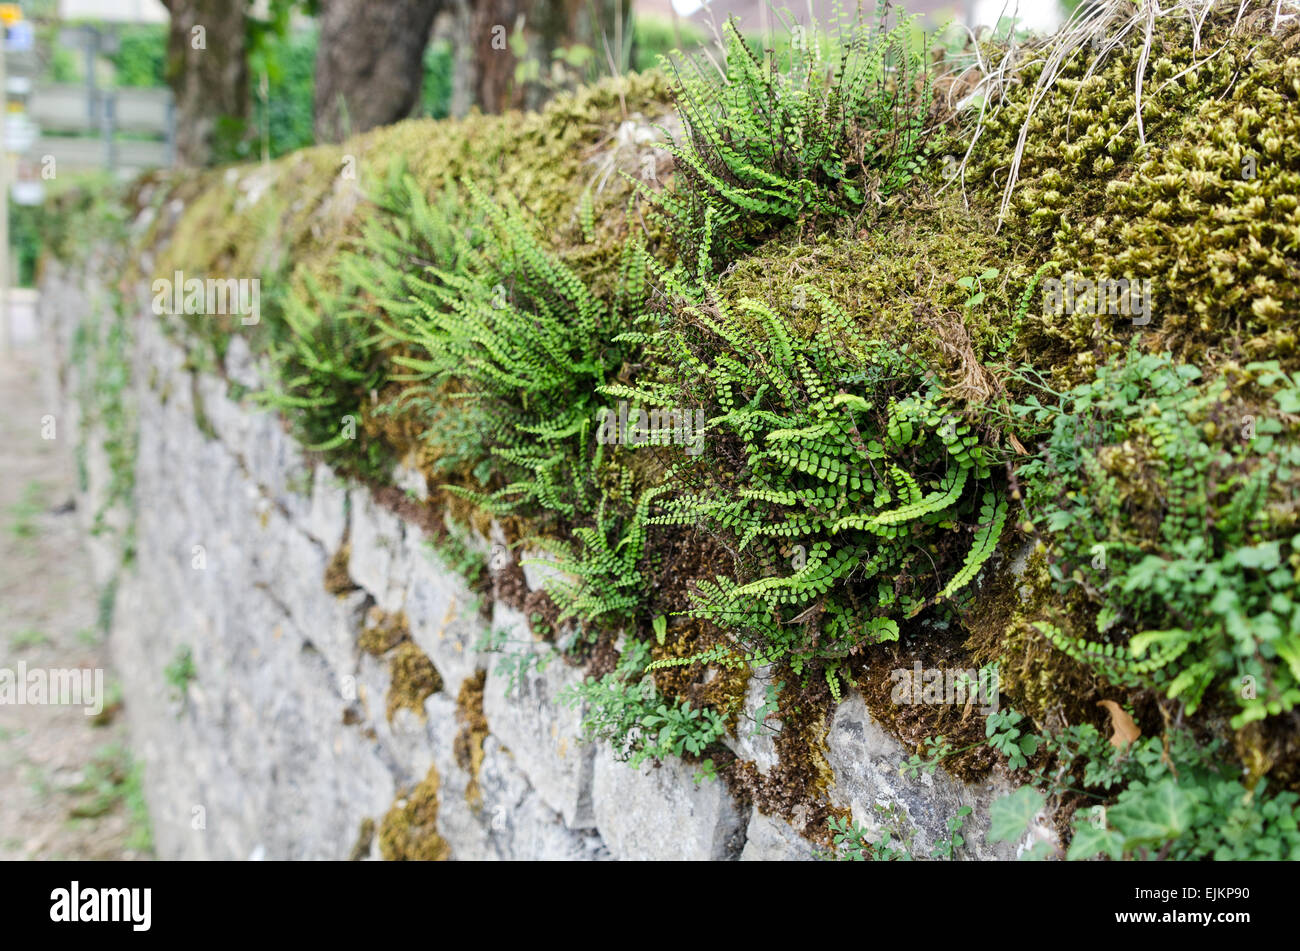 Maidenhair ferns growing among moss on top of an old stone wall in Chagny, Saône-et-Loire, Burgundy, France. Stock Photo